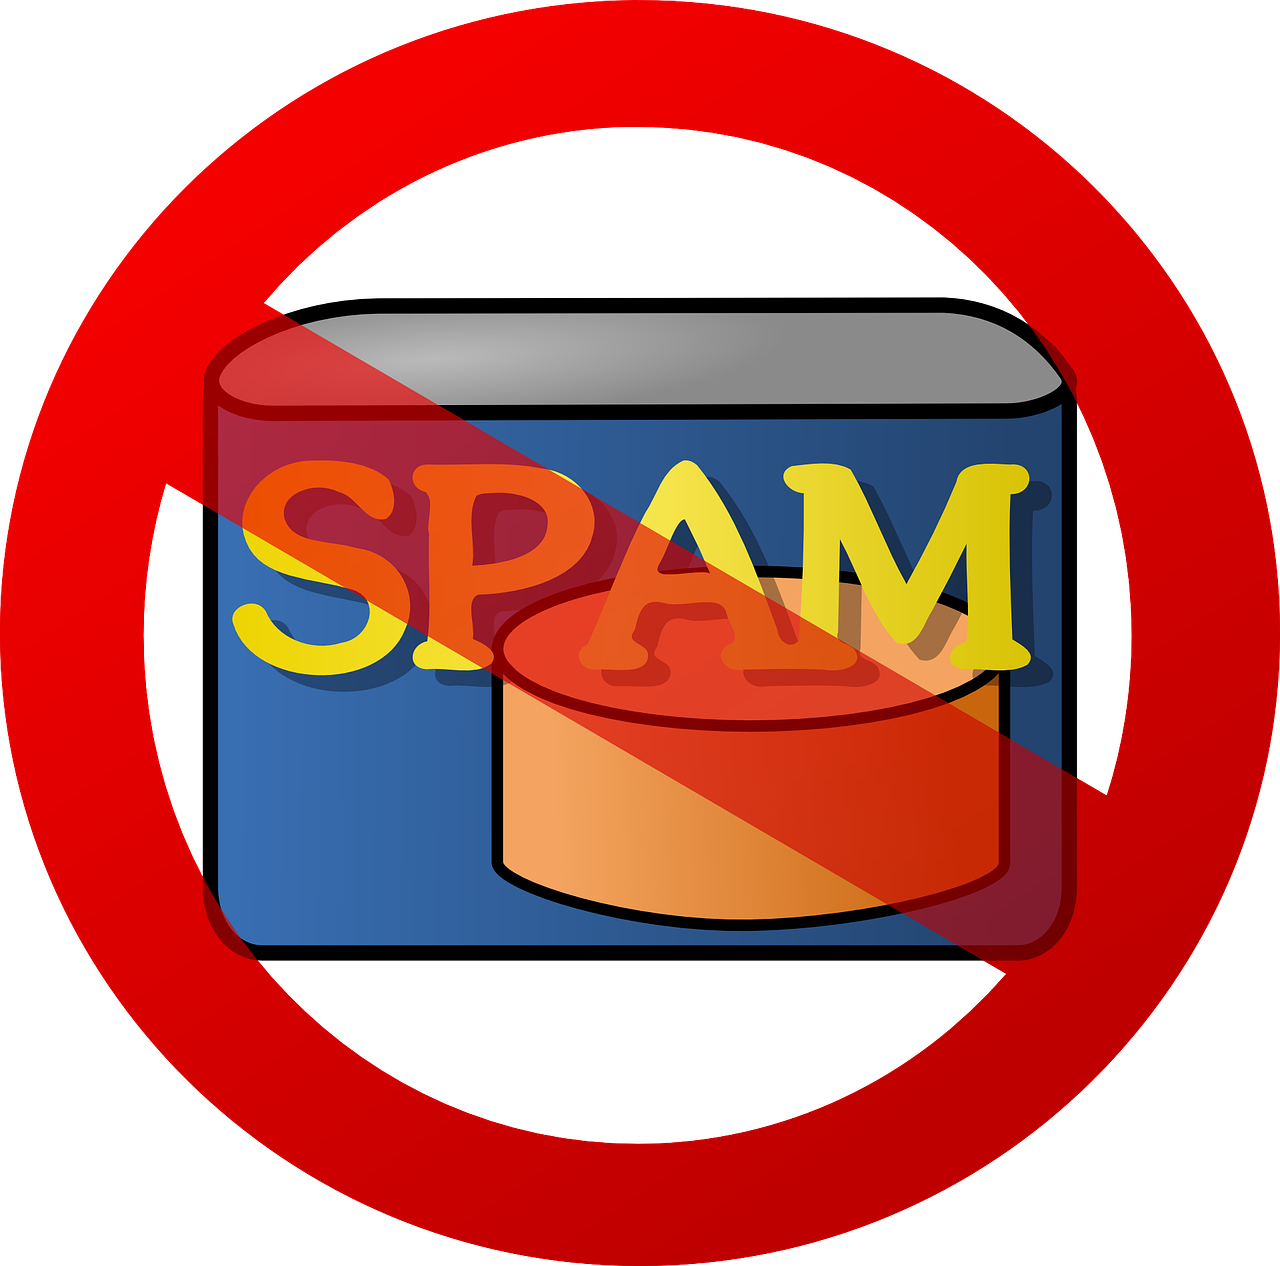 Do Press Release Services Spam? By Angela Hoy